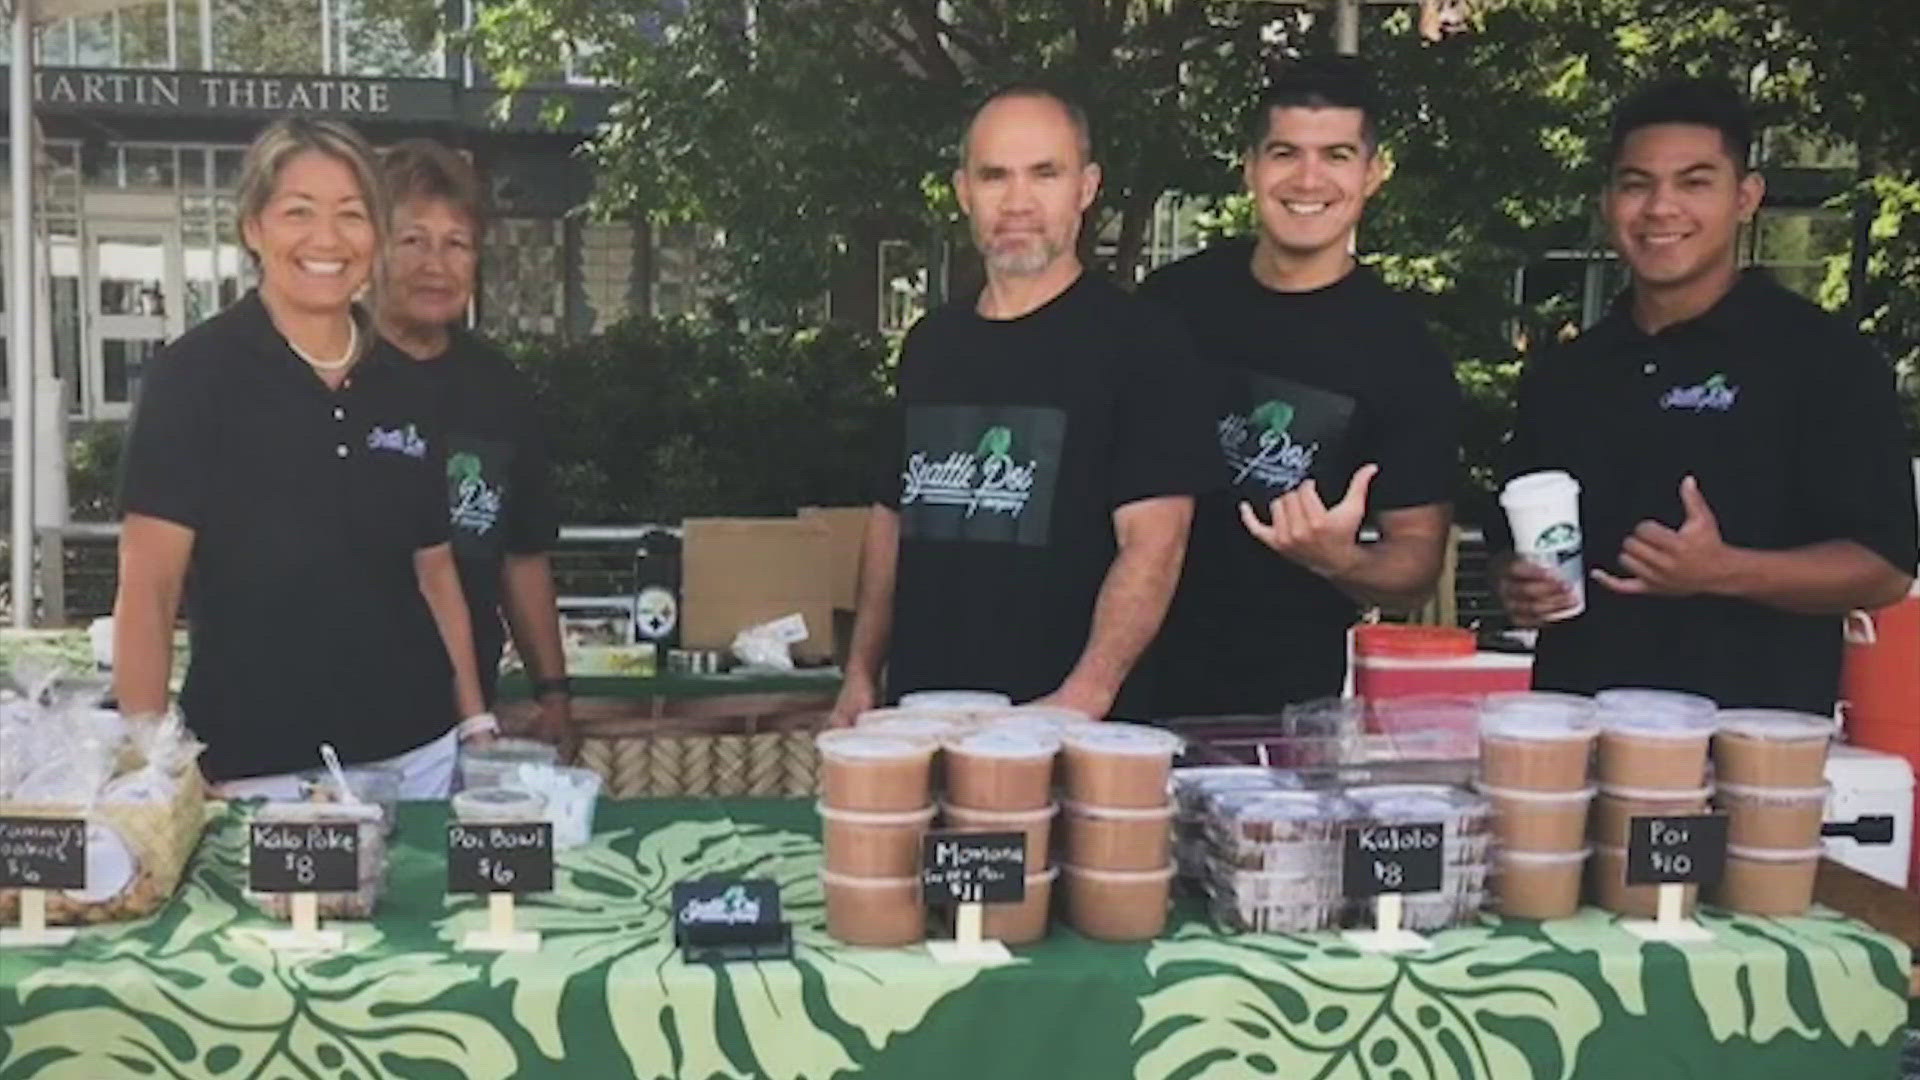 Seattle Poi Company is the only small business in the continental U.S. that makes the traditional Hawaiian treat poi